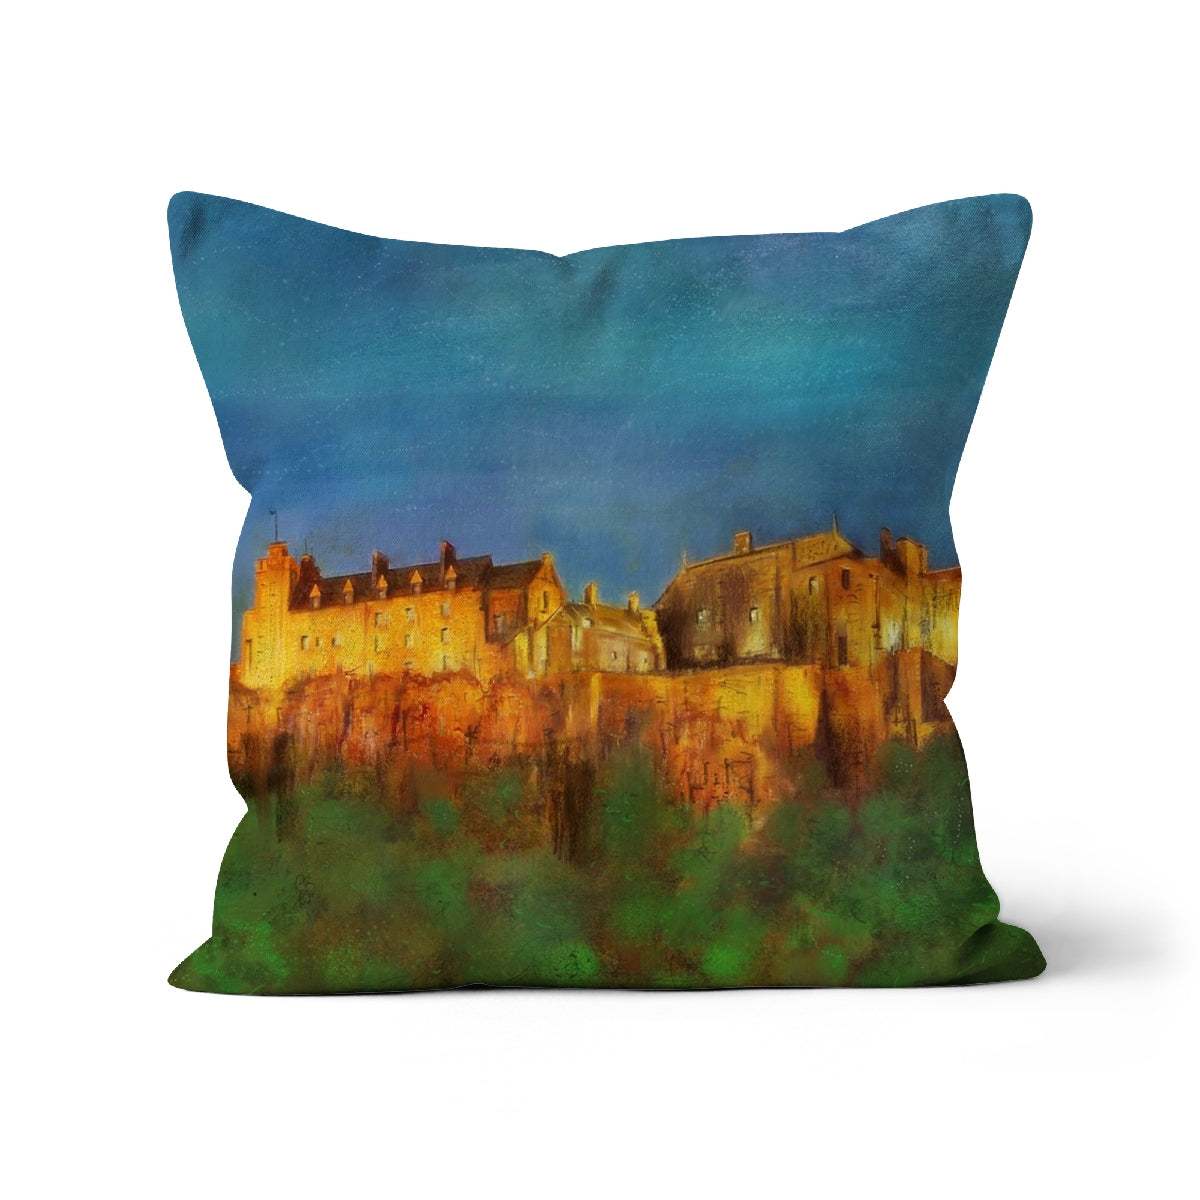 Stirling Castle Art Gifts Cushion-Cushions-Historic & Iconic Scotland Art Gallery-Faux Suede-22"x22"-Paintings, Prints, Homeware, Art Gifts From Scotland By Scottish Artist Kevin Hunter